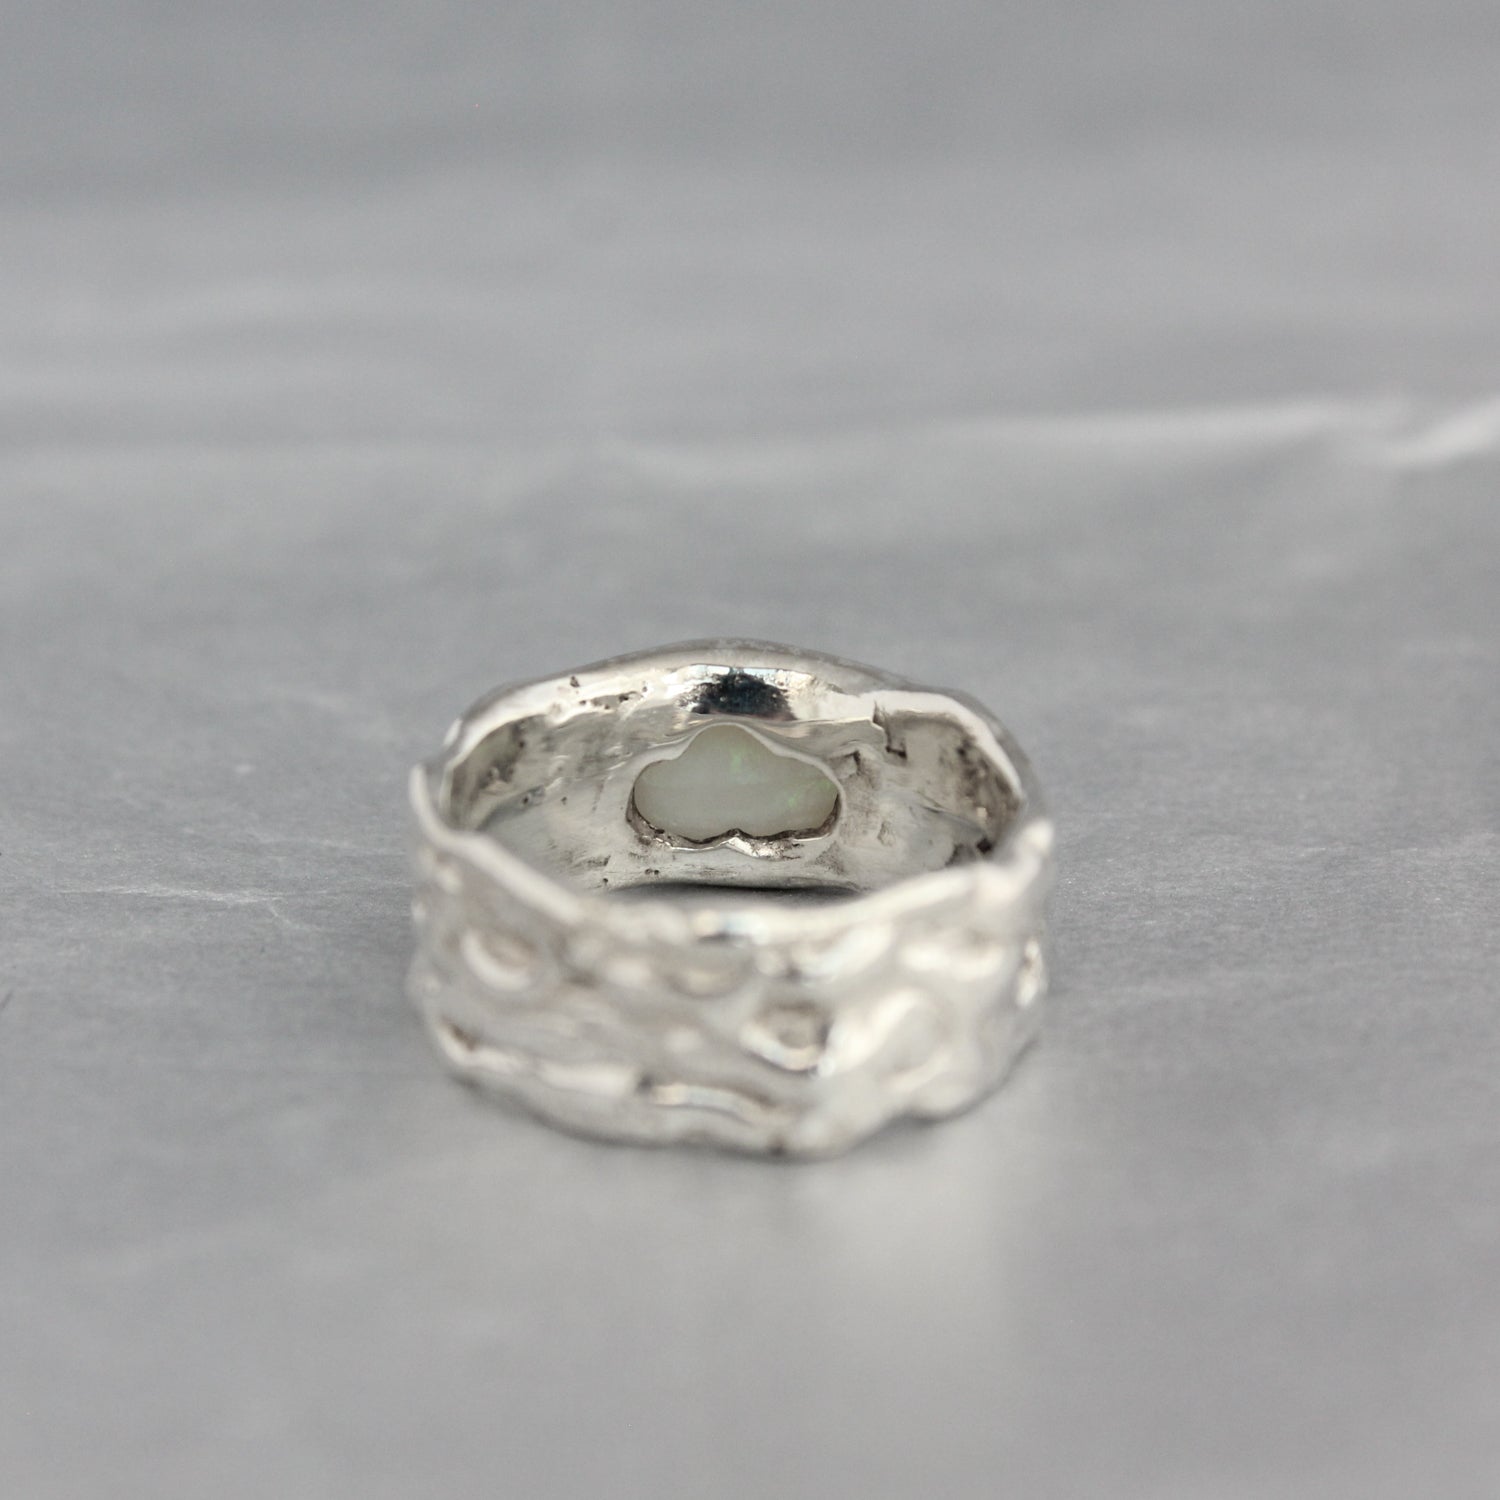 Cloud Ring - Size 6.25